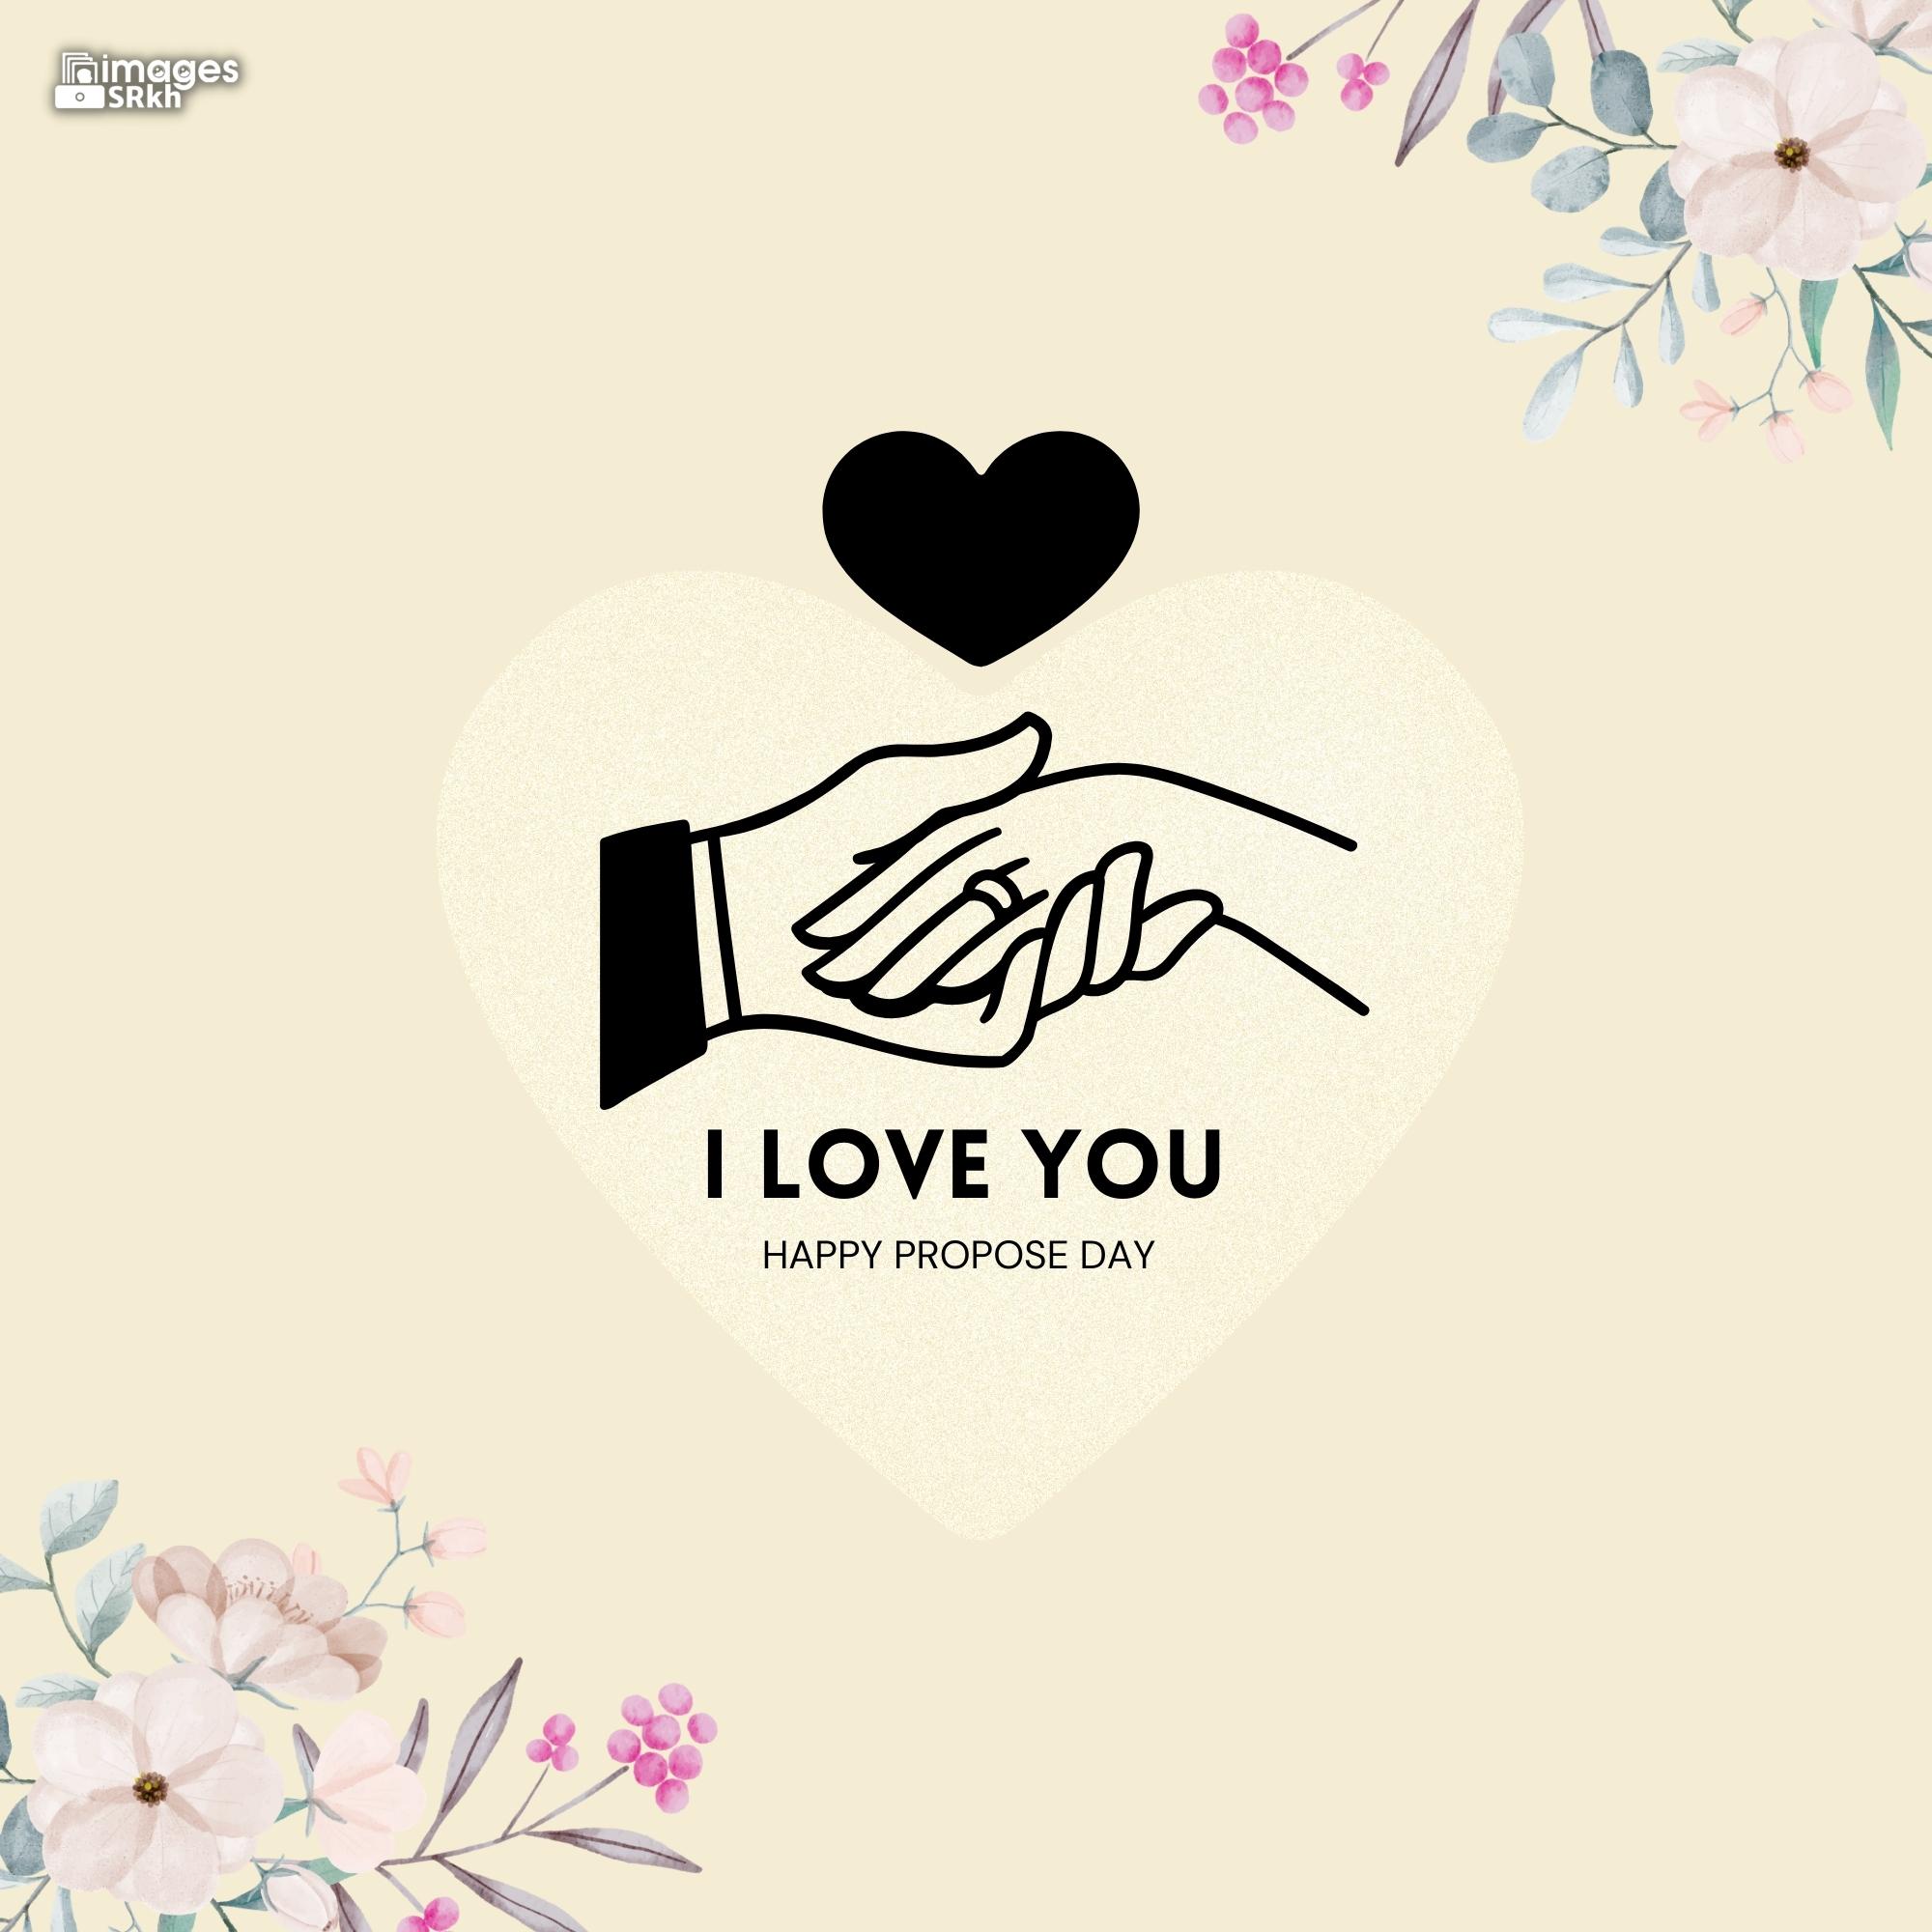 Happy Propose Day Images | 383 | I LOVE YOU